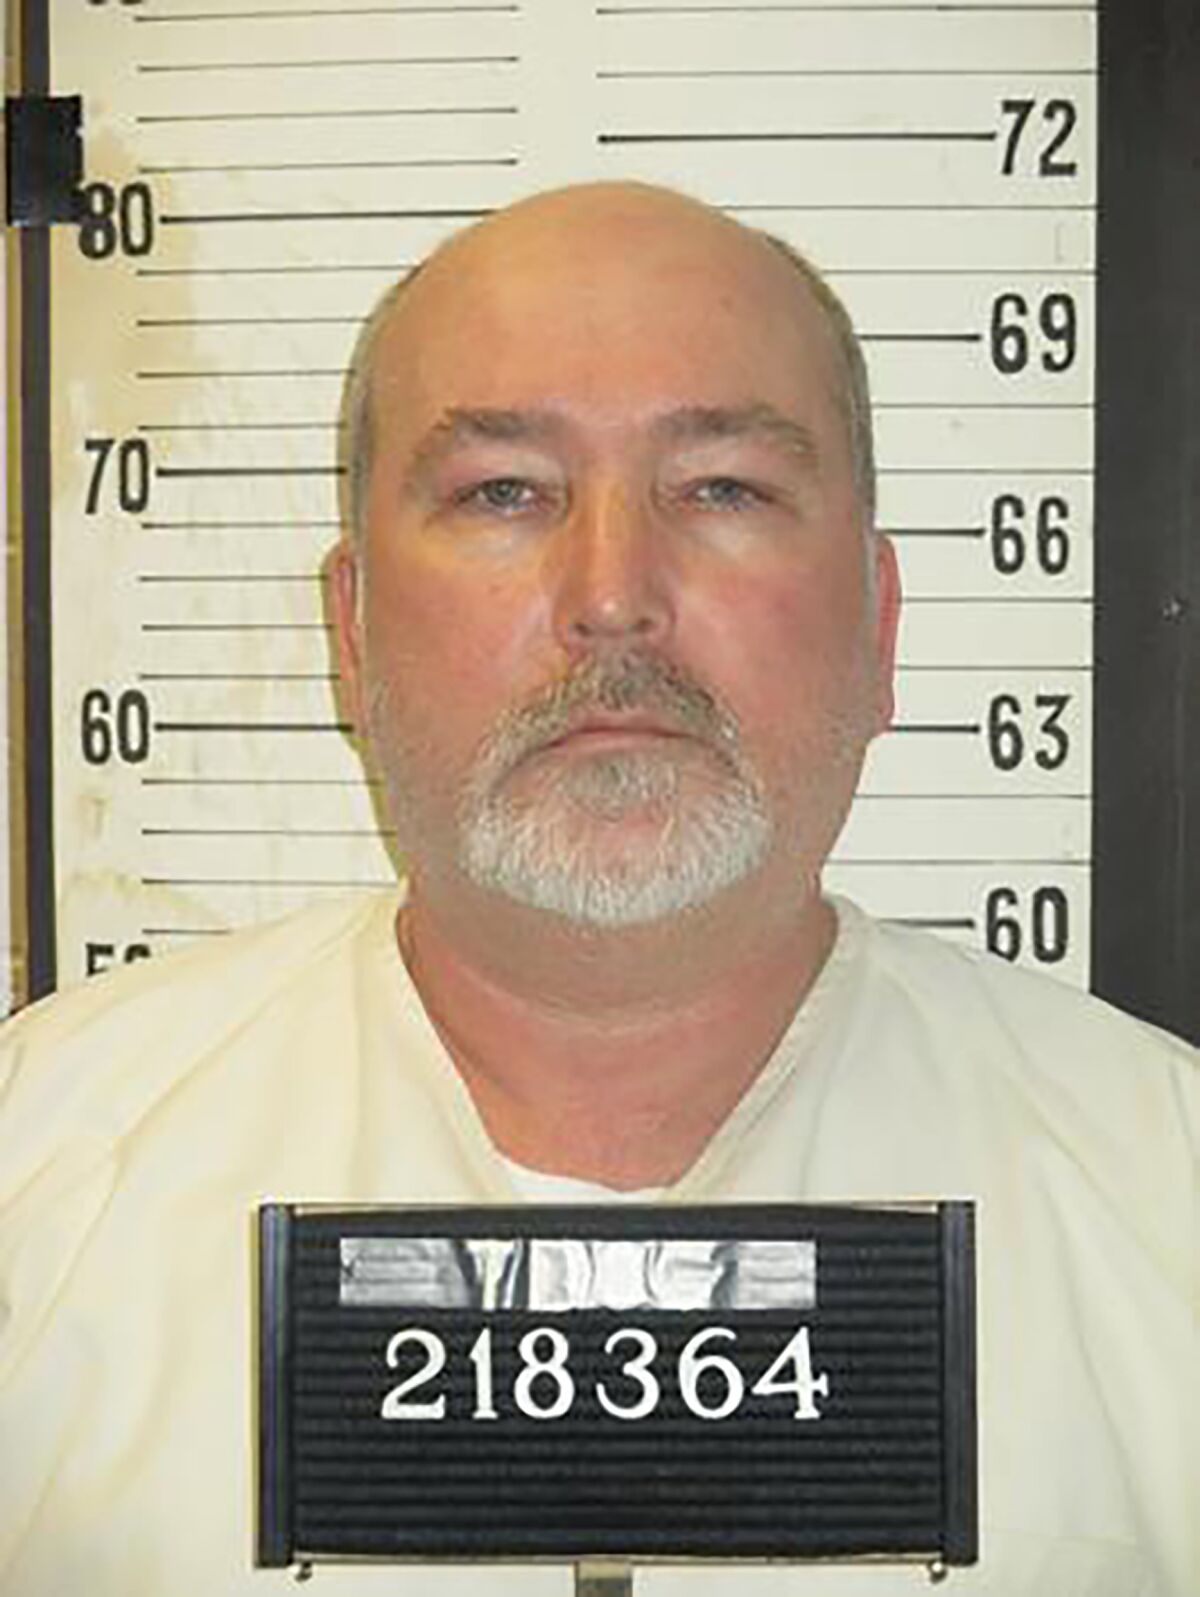 This photo provided by the Tennessee Department of Corrections shows Gary Wayne Sutton. Tennessee last week set three new execution dates for inmates in 2022, driving the total number of executions planned this year to five. The state had temporarily halted executions during the pandemic but is currently planning one execution every other month beginning in April. Last week, the Tennessee Supreme Court set execution dates for Donald Middlebrooks, Byron Black, and Gary Wayne Sutton. (Tennessee Department of Corrections via AP)